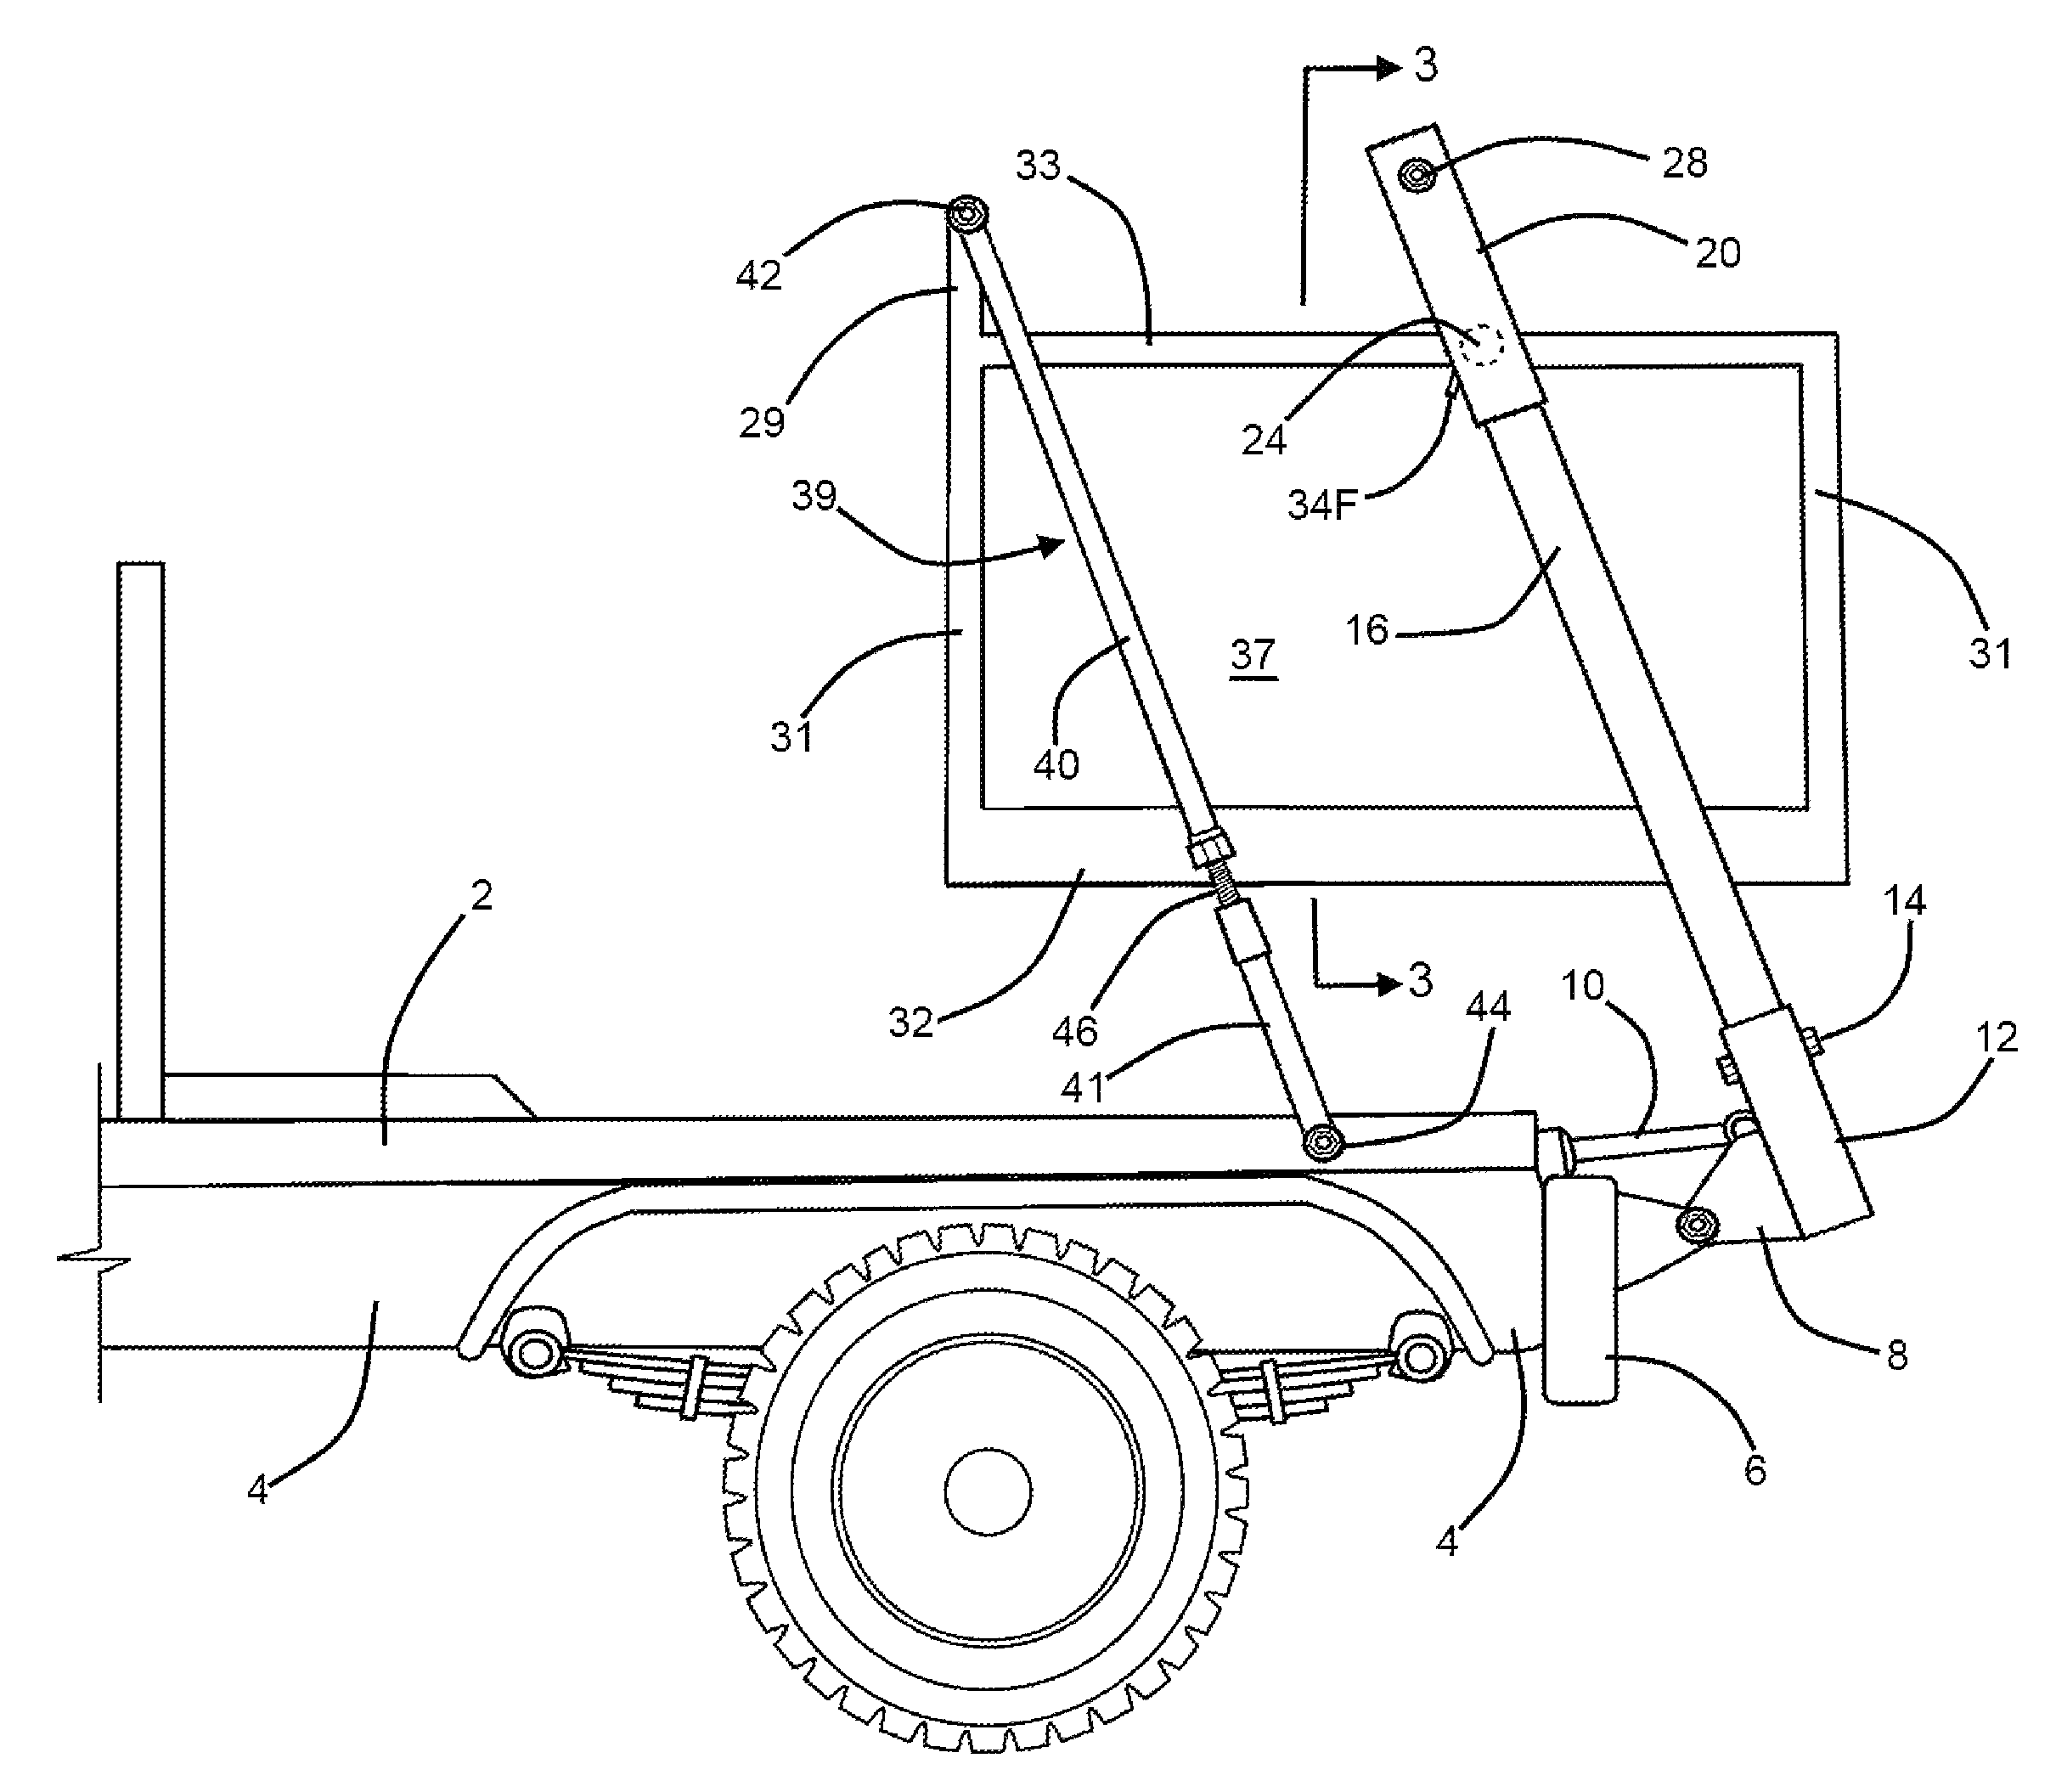 Truck bed bale loader auxiliary assembly